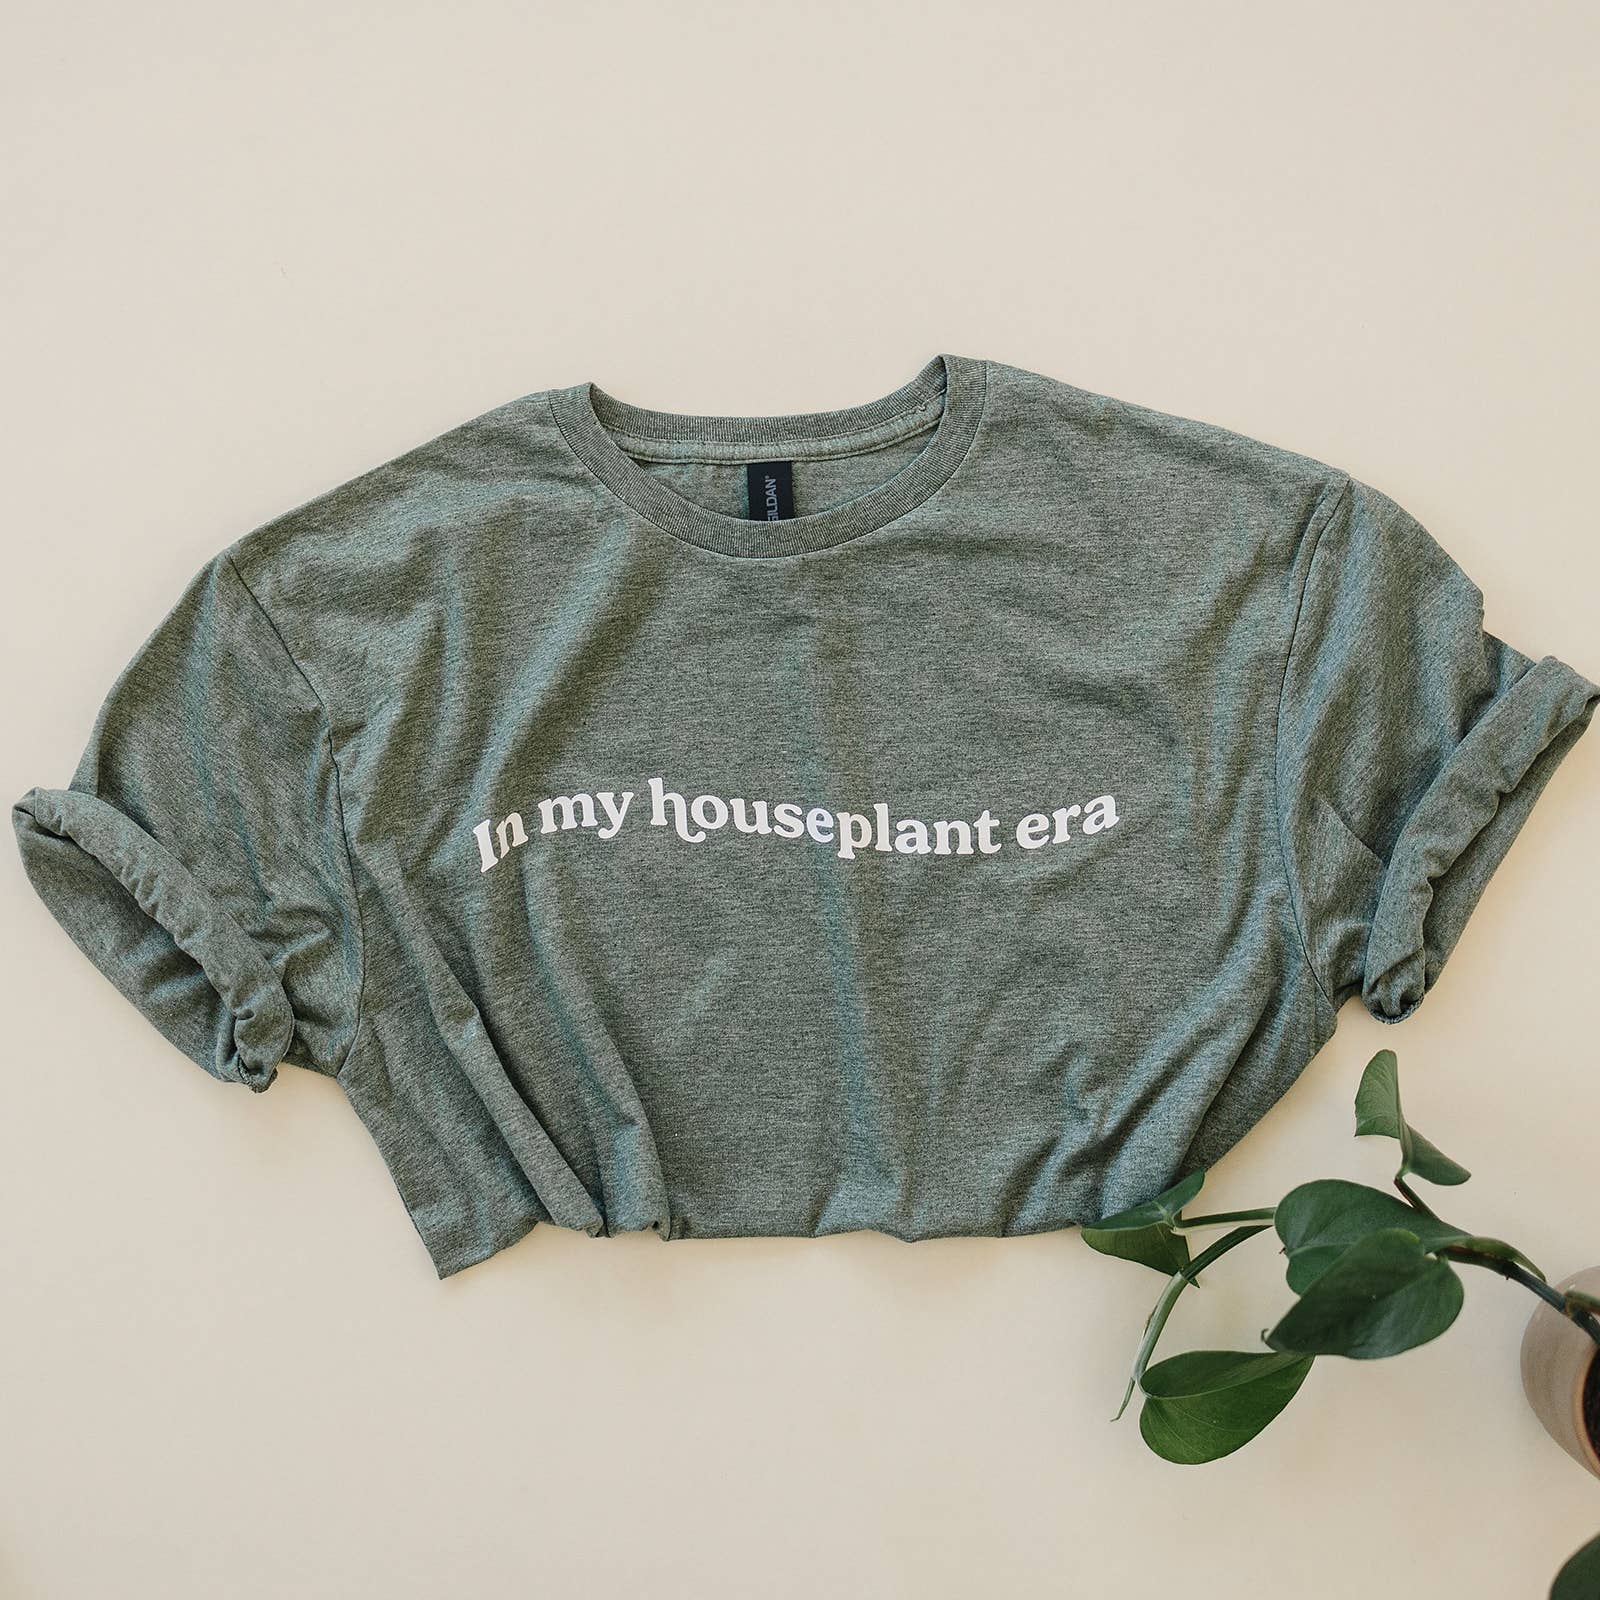 Packer Plant Co - Houseplant Era Graphic T-Shirt | Gifts for Plant Lovers: Heather Military Green / 2XL